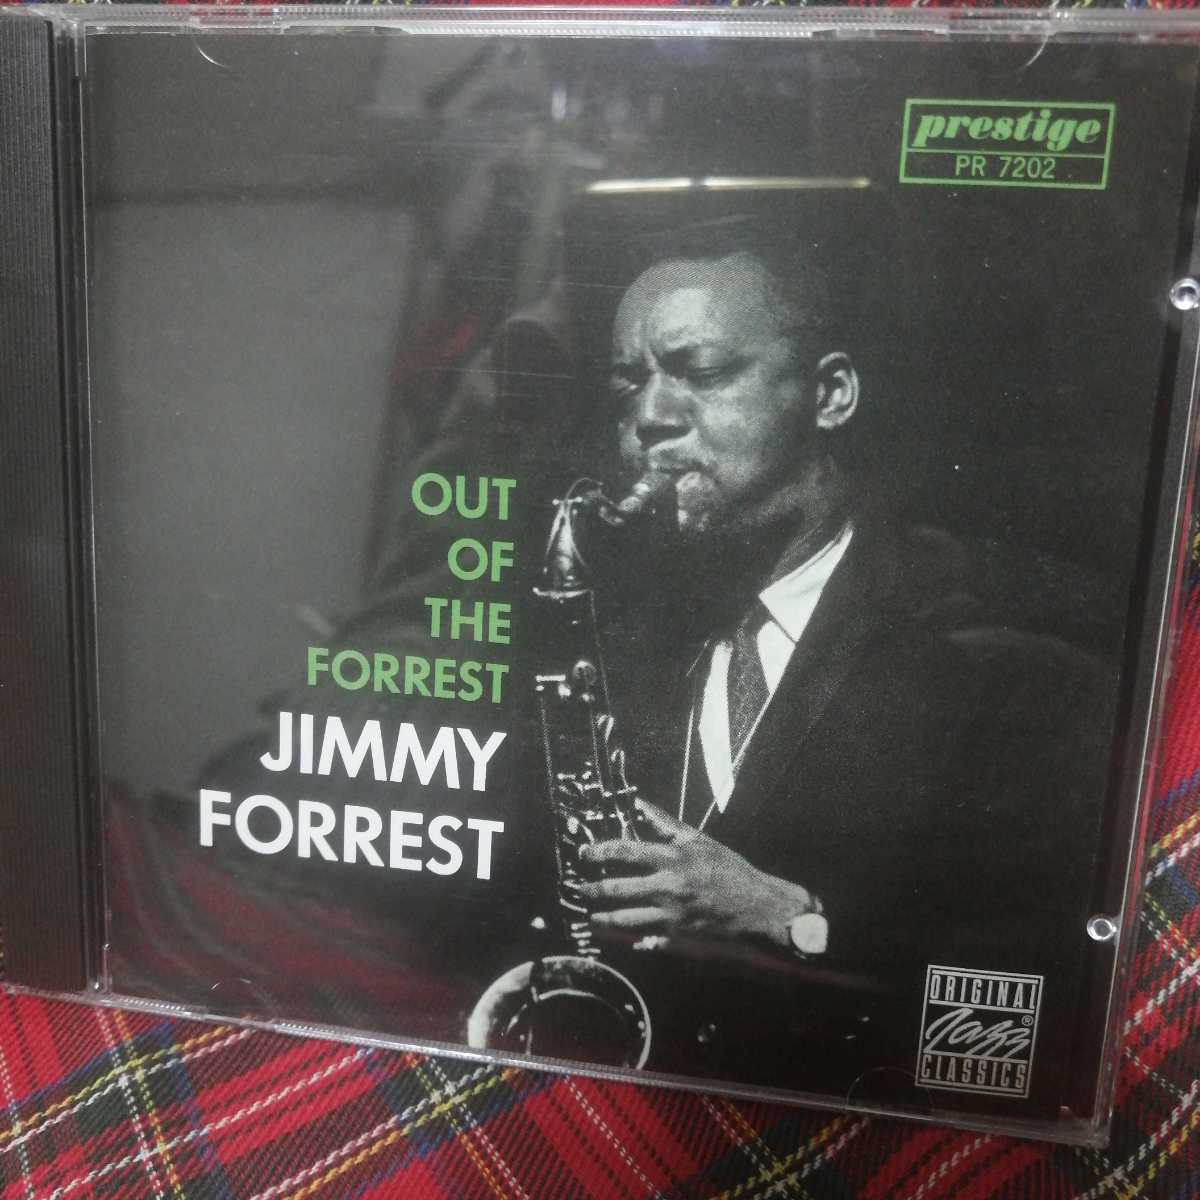 CD　ジミー・フォレスト　アウト・オブ・ザ・フォレスト　Jimmy Forrest Out of the Forrest 　ジョー・ザビヌル・ピアノ　輸入盤　美品_画像1